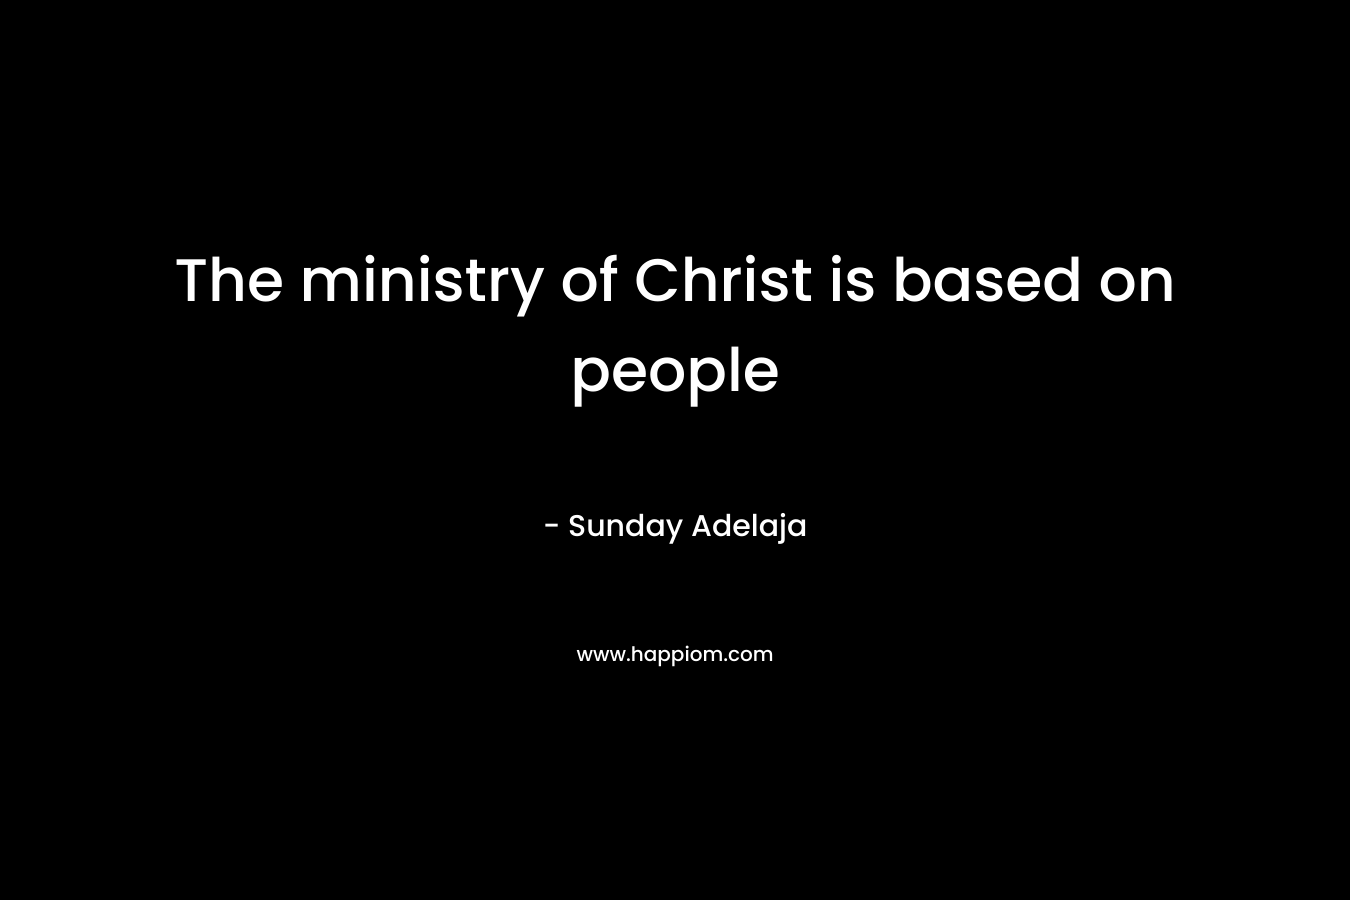 The ministry of Christ is based on people